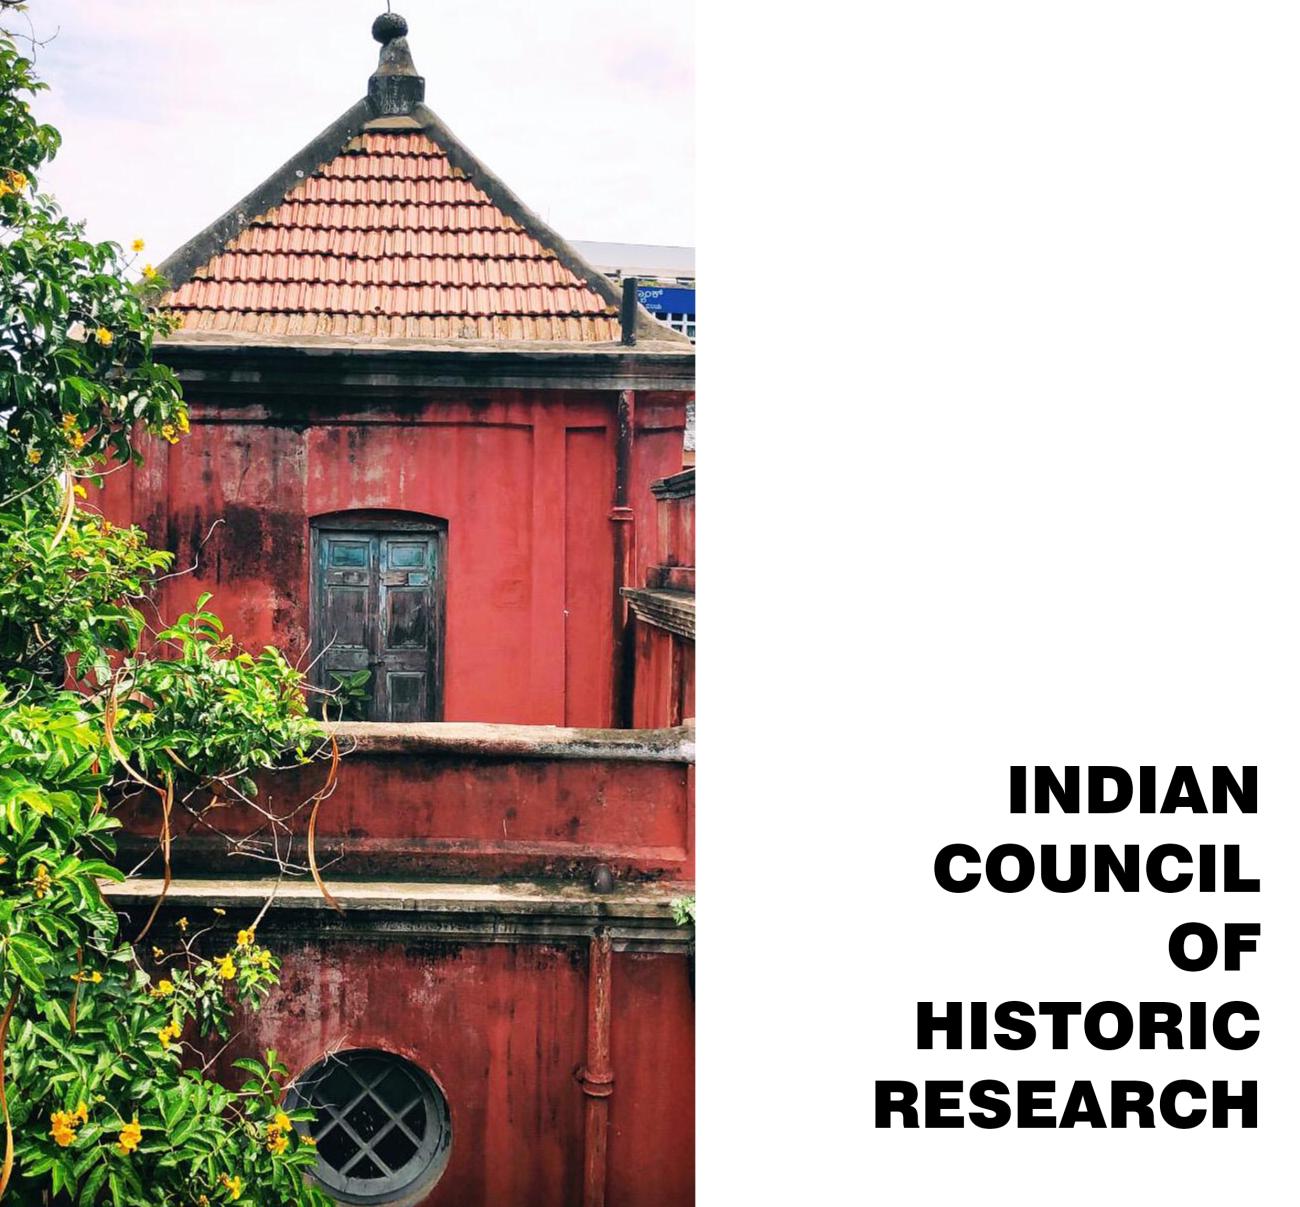 Indian Council of Historic Research